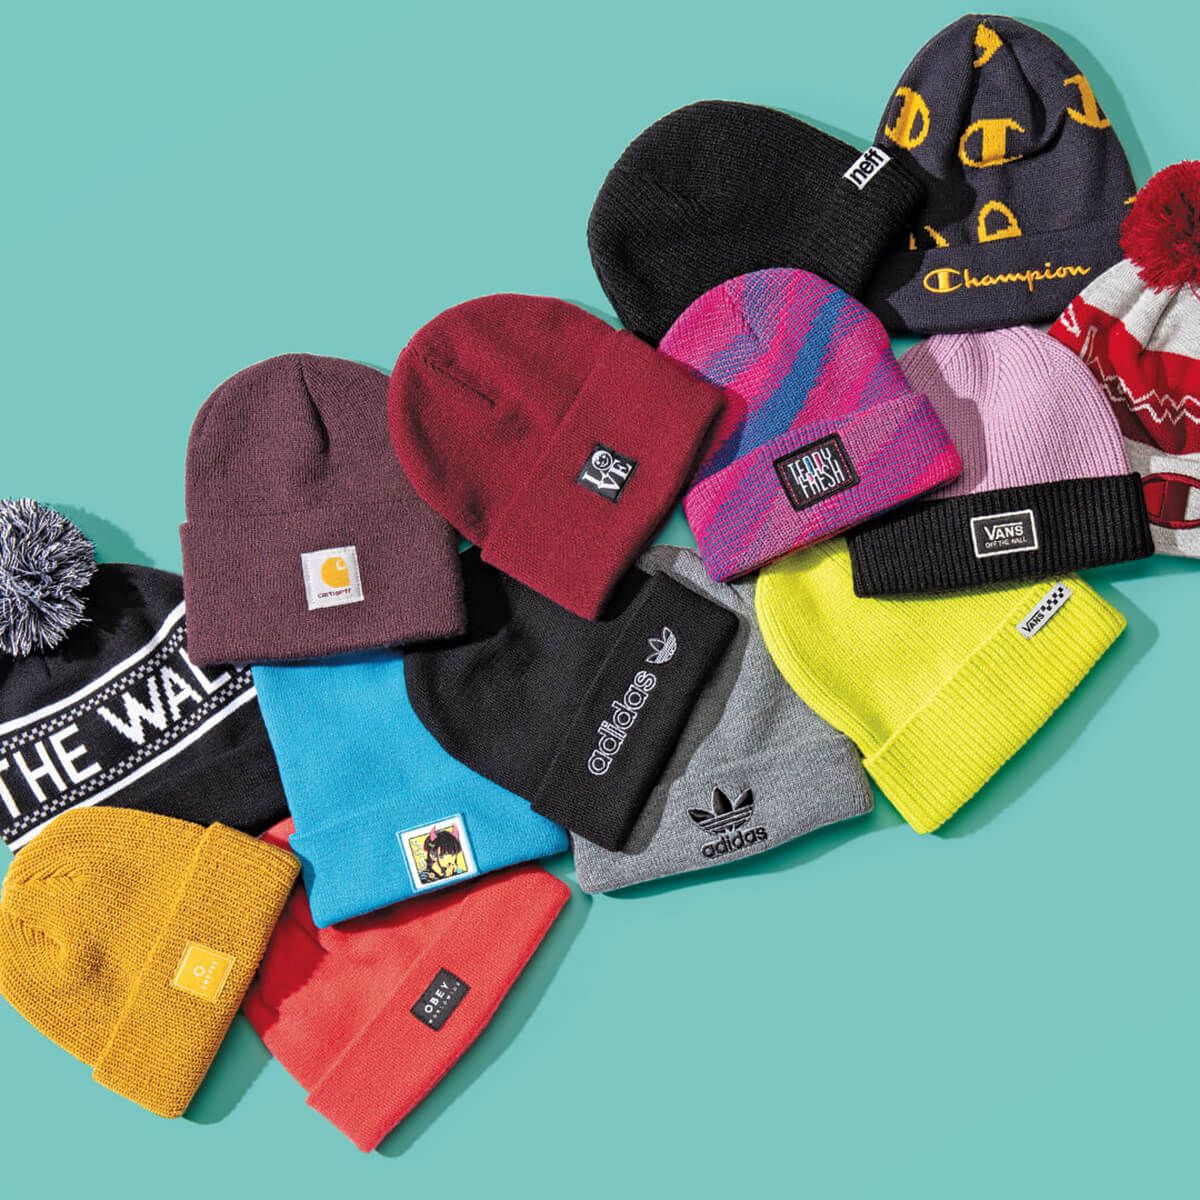 NEW ARRIVAL BEANIES FOR ALL - SHOP NOW